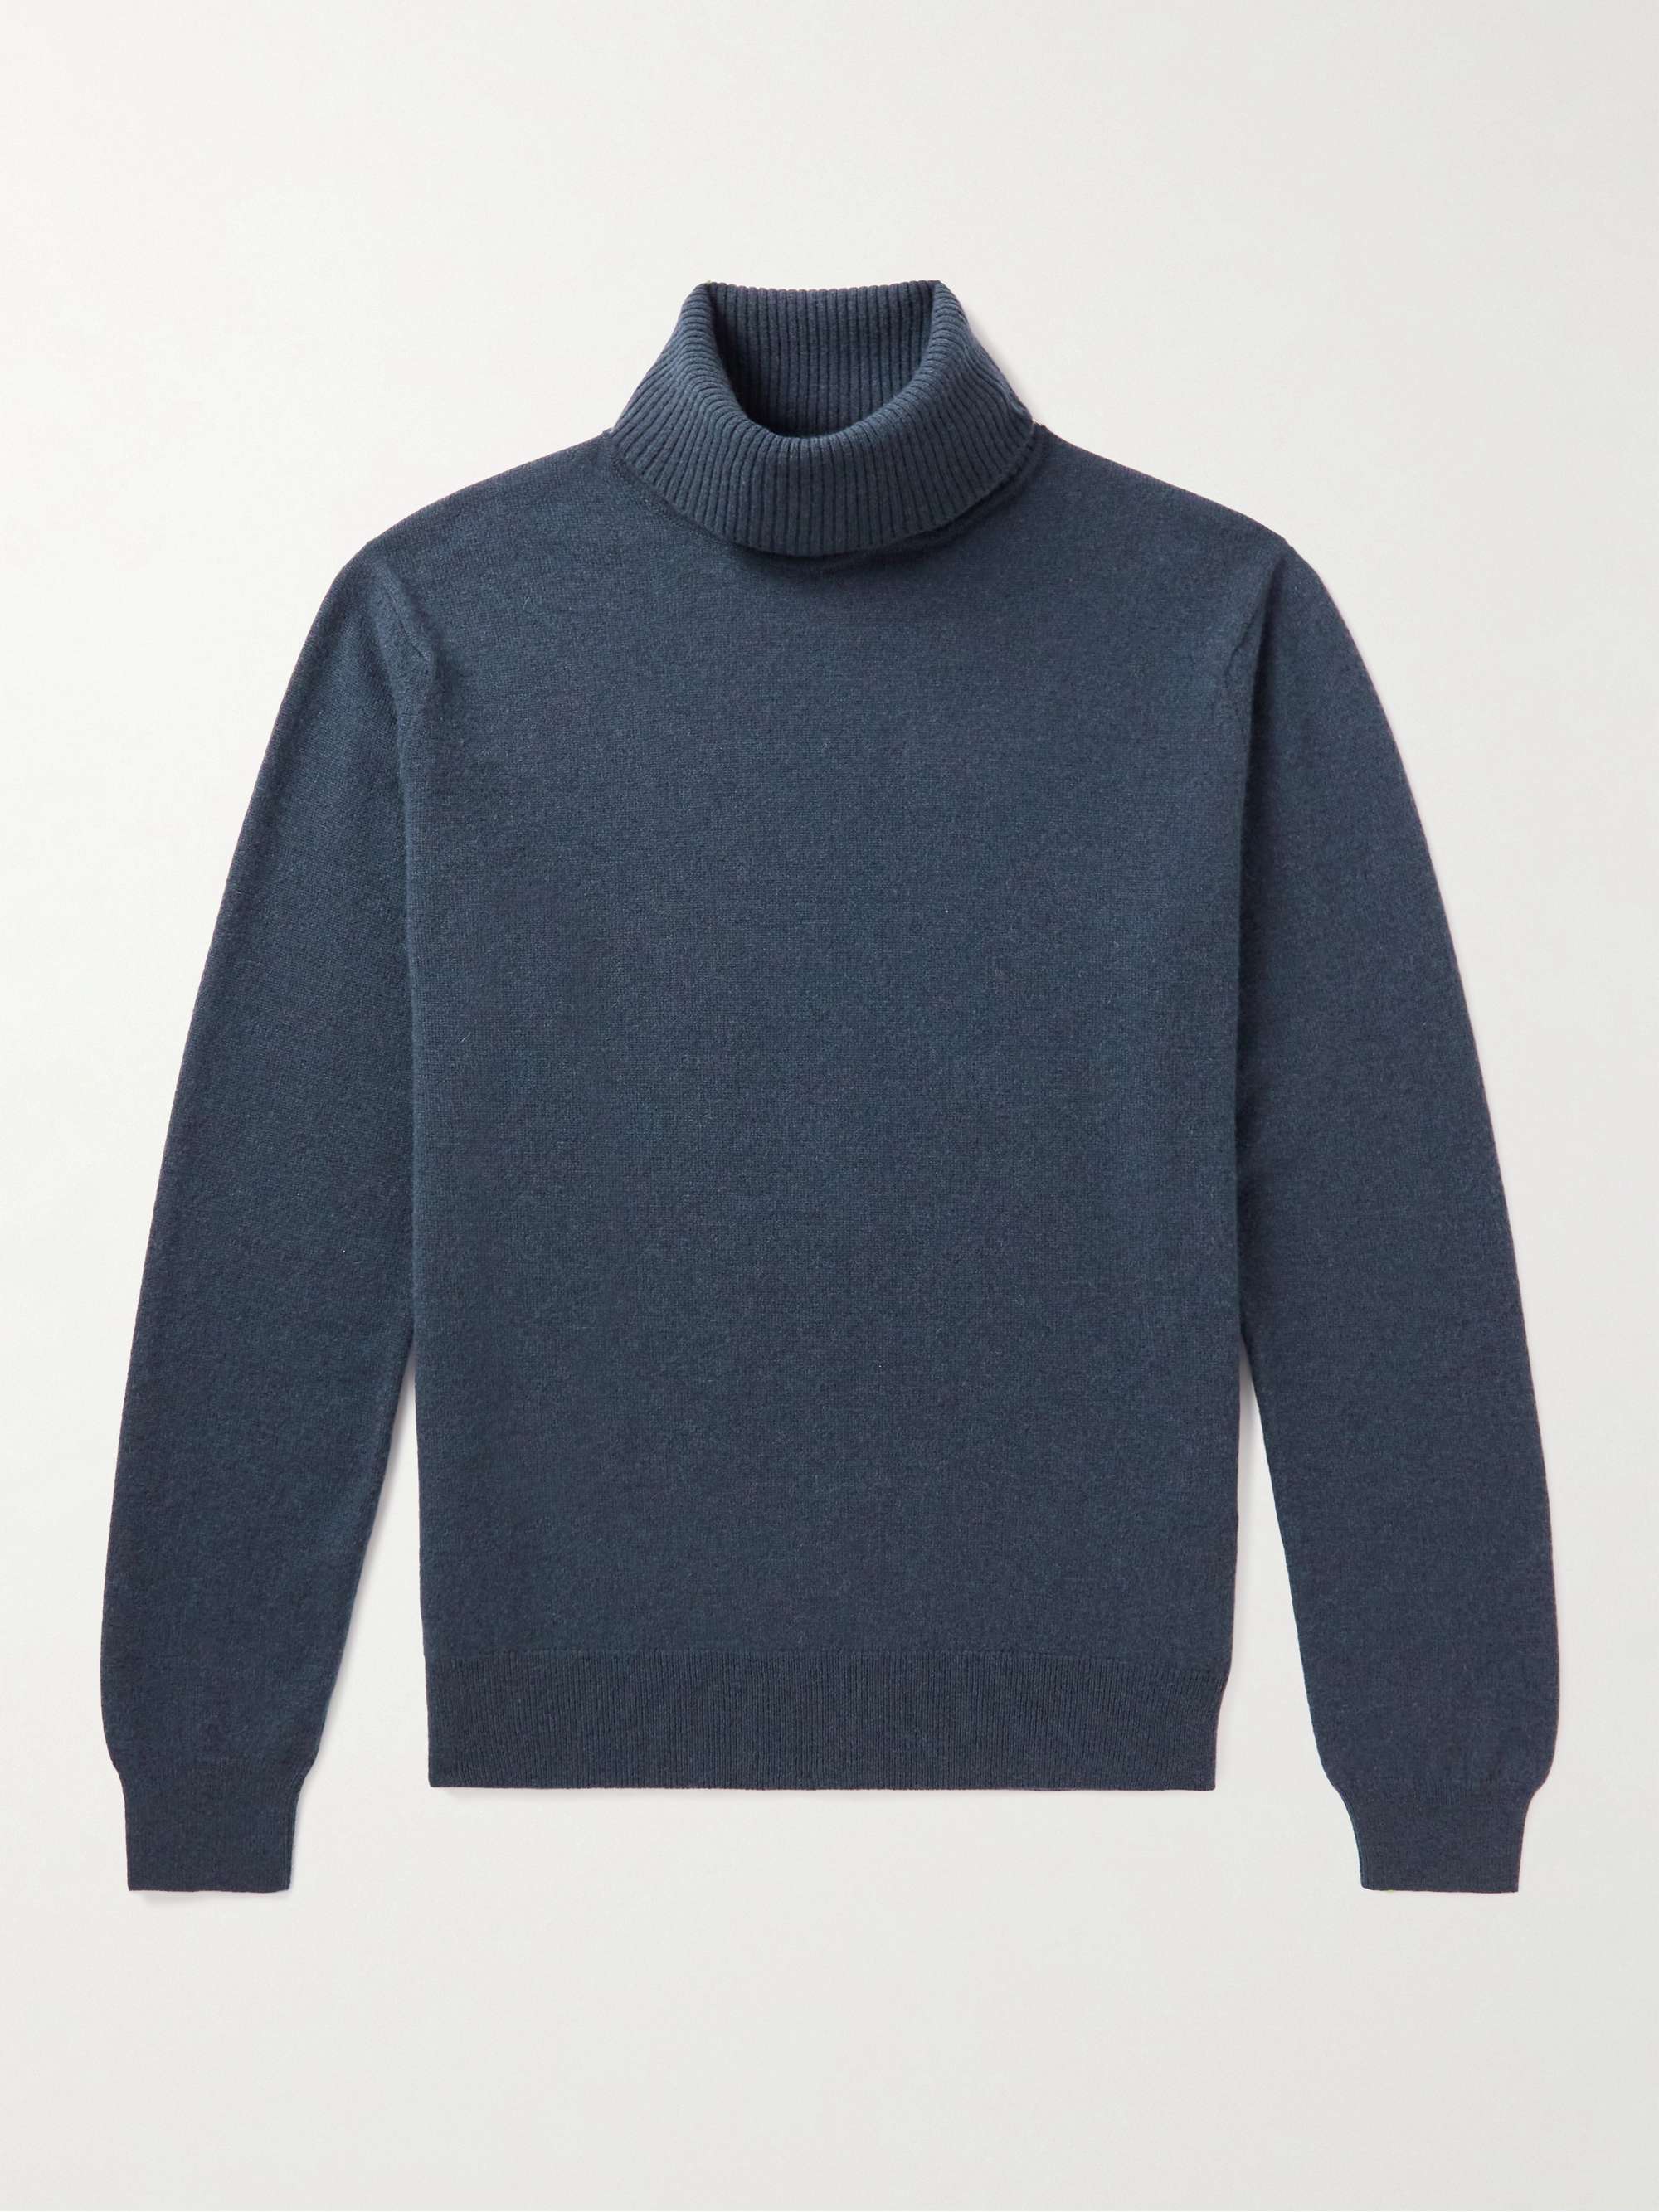 TOM FORD Cashmere Rollneck Sweater